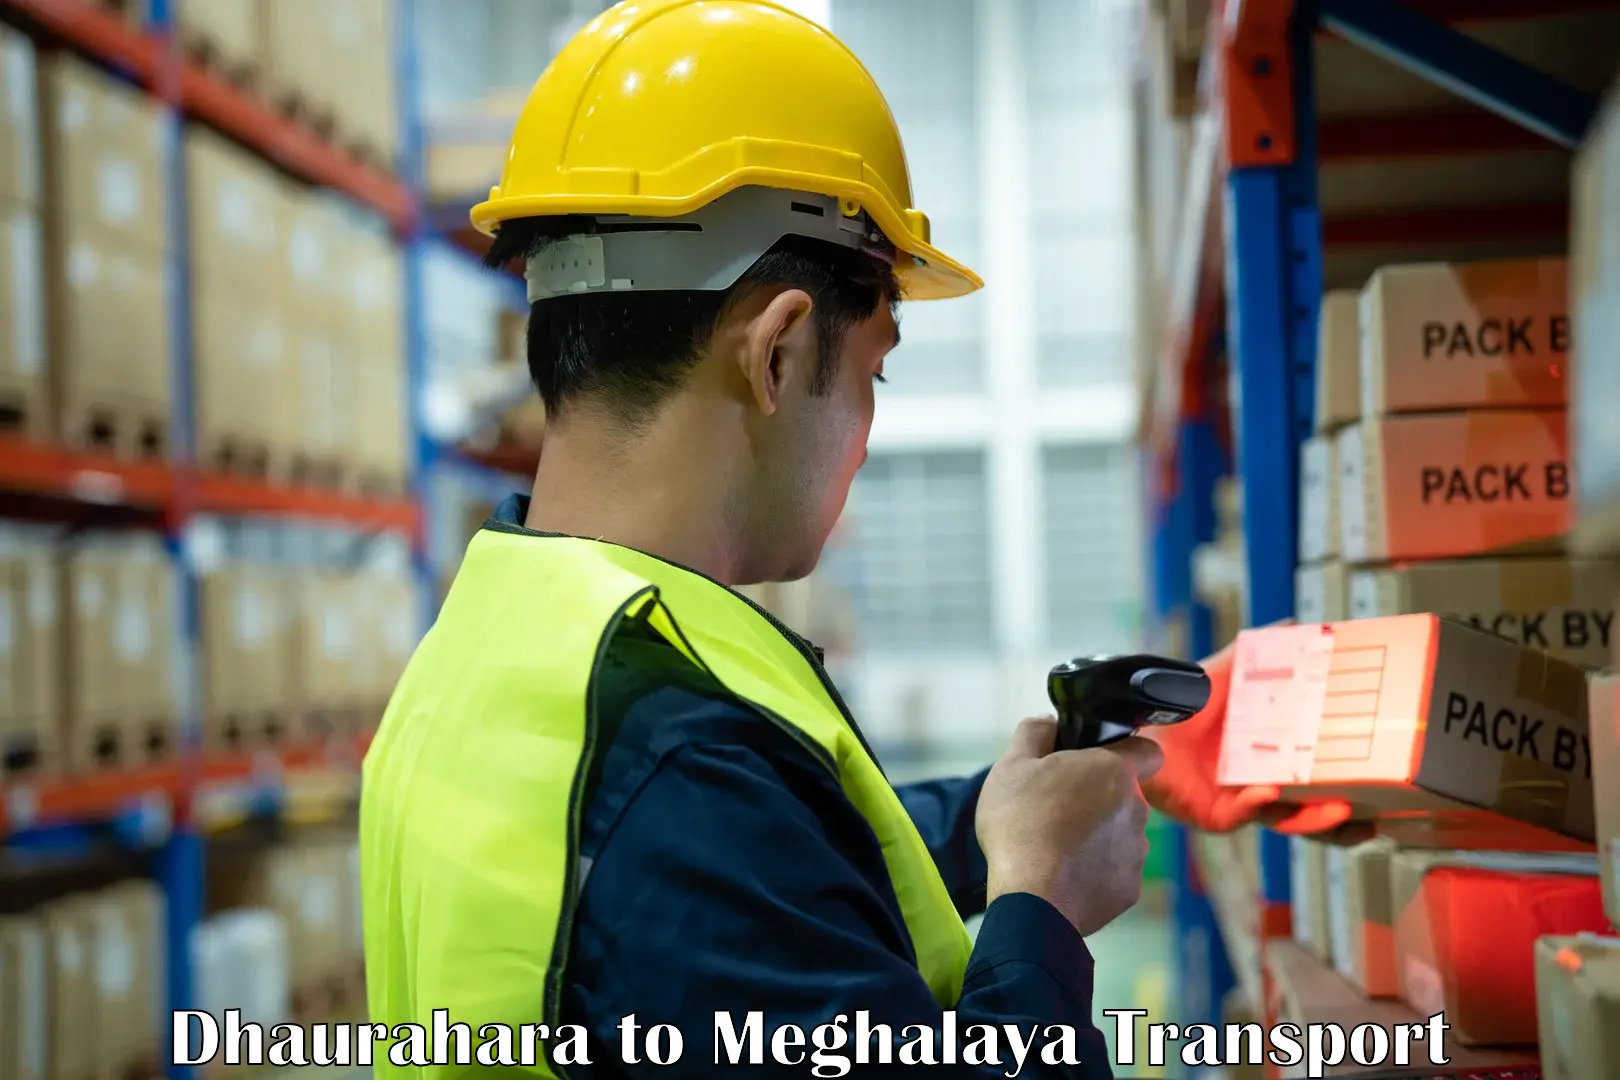 Commercial transport service Dhaurahara to Meghalaya